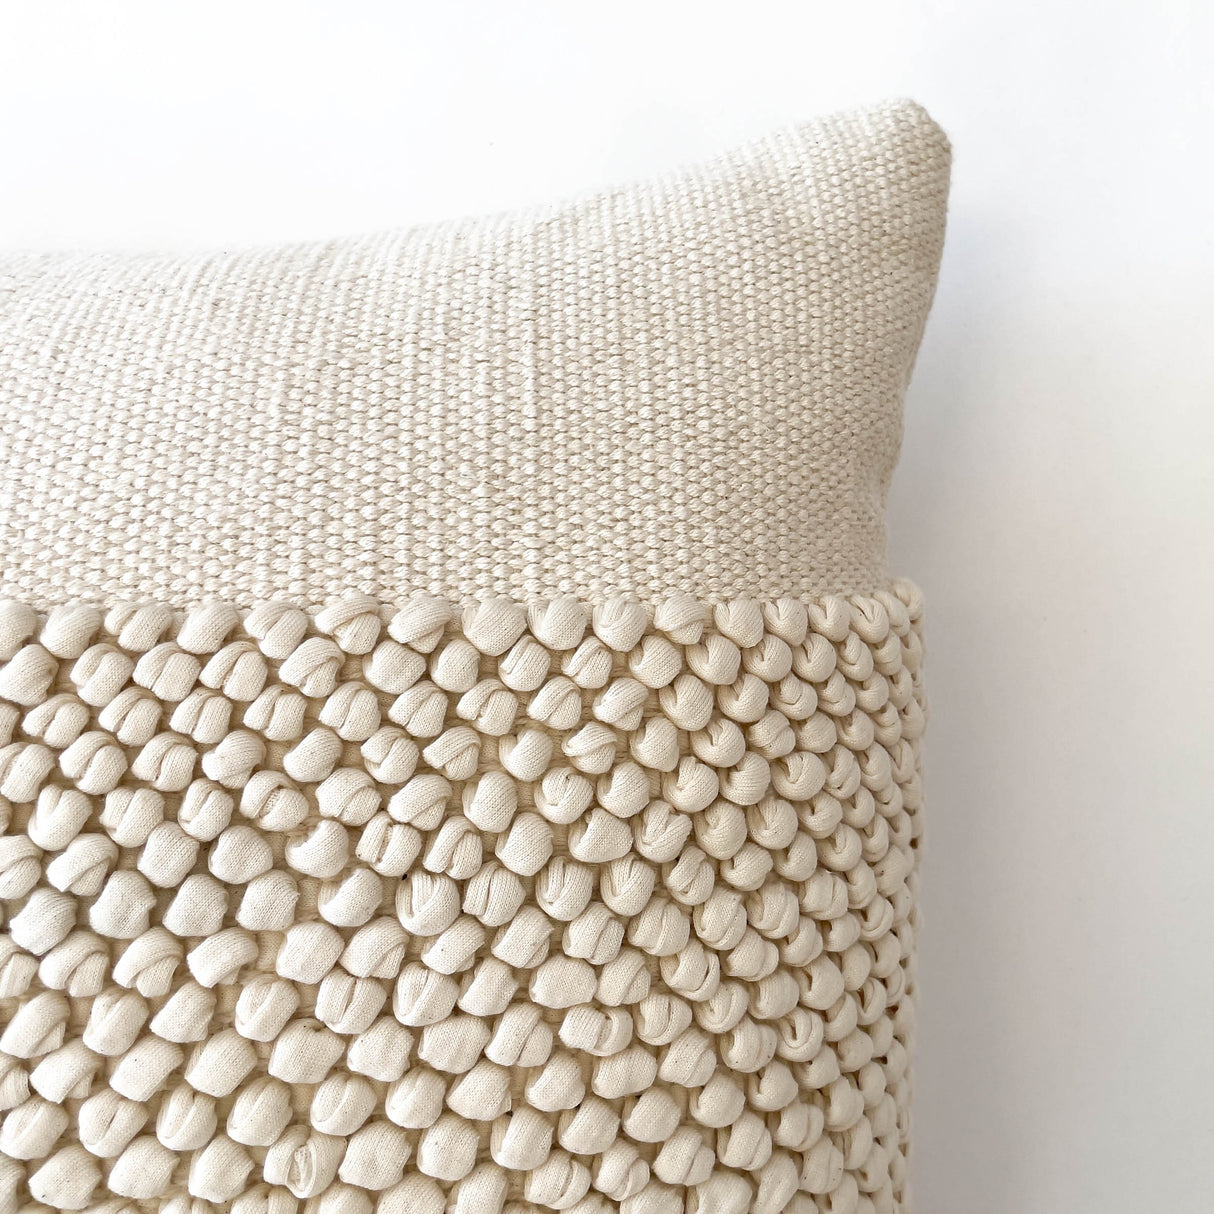 KELLY HANDWOVEN PILLOW - The Loomia